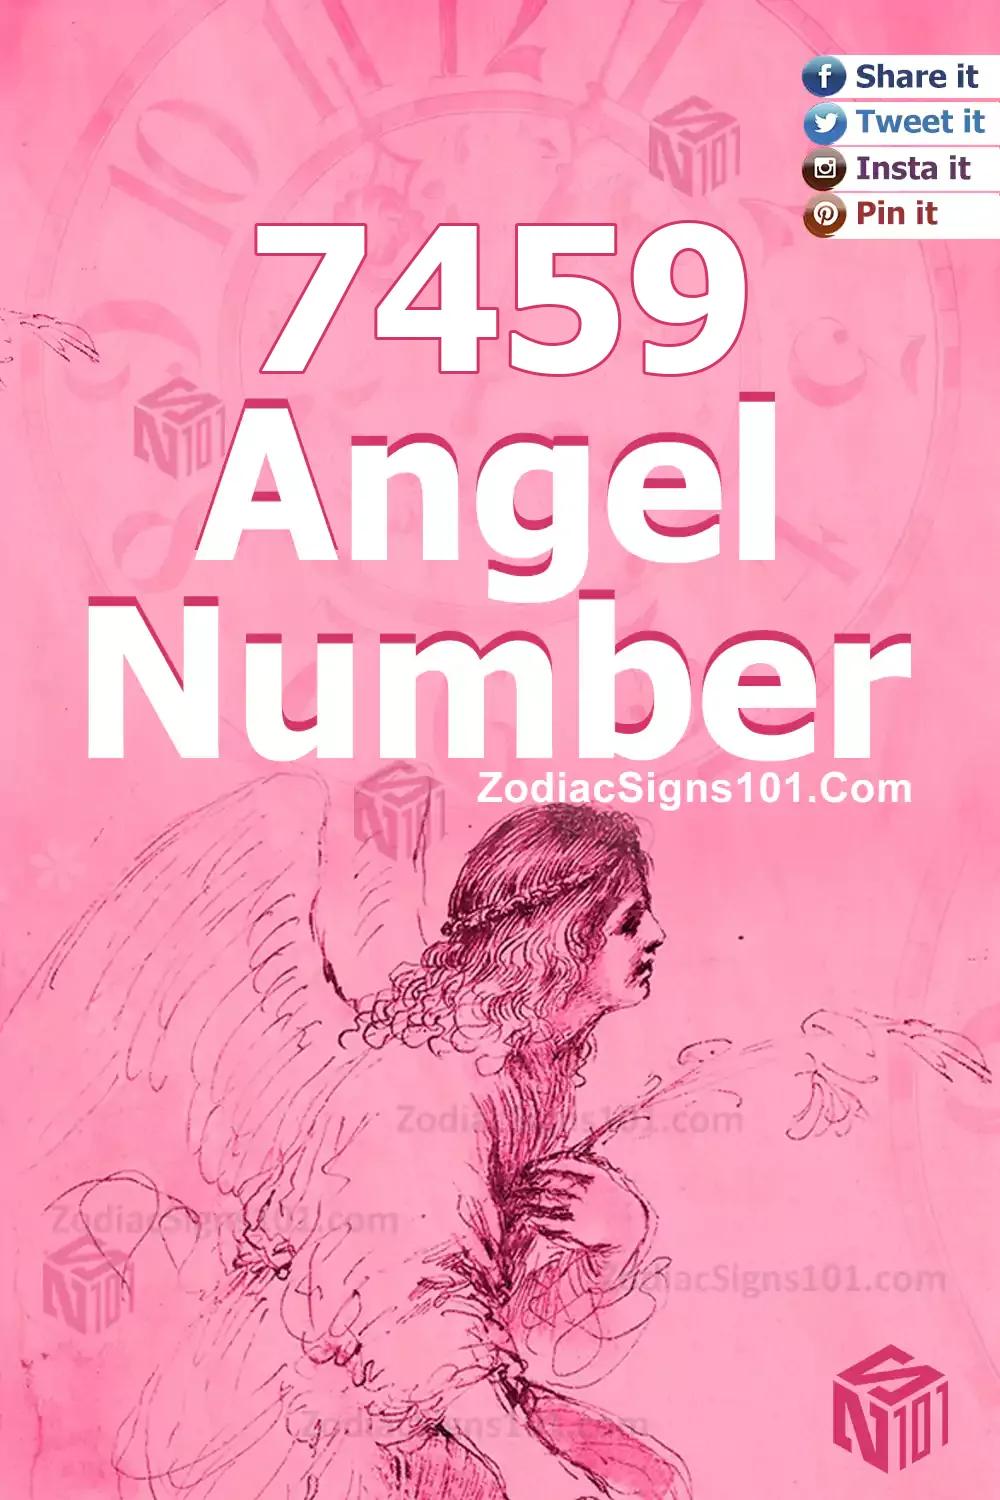 7459 Angel Number Meaning